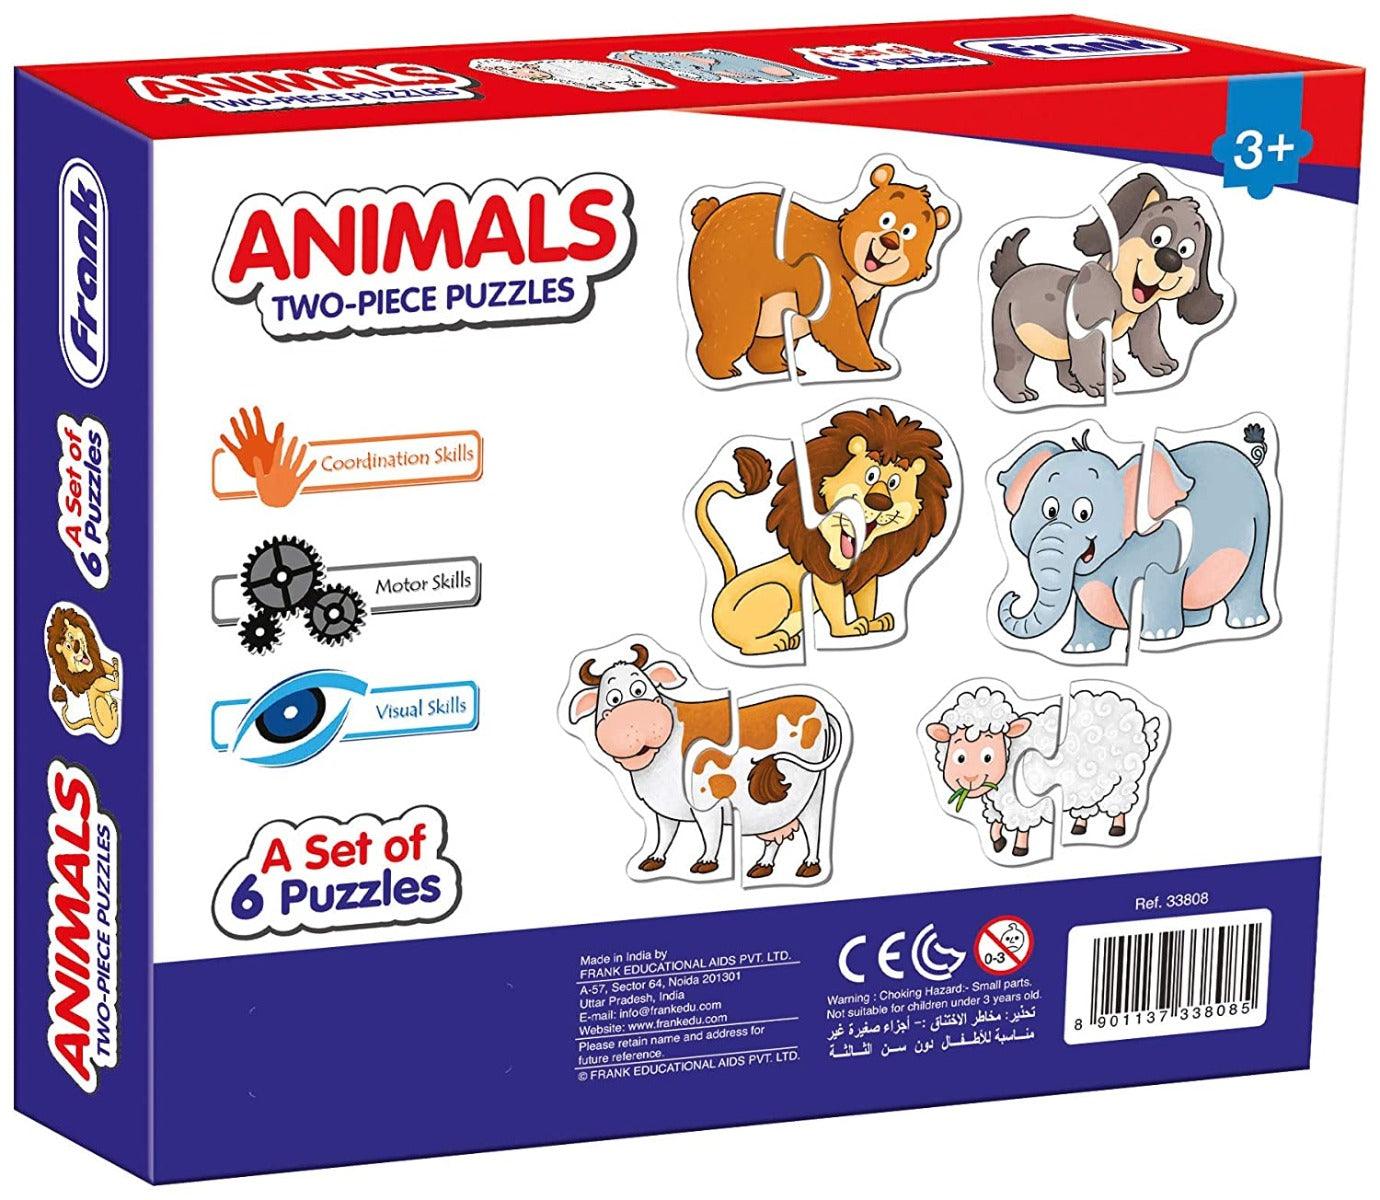 Frank Animals Puzzles - A Set of 6 Two-Piece Shaped Jigsaw Puzzles for 3 Year Old Kids and Above